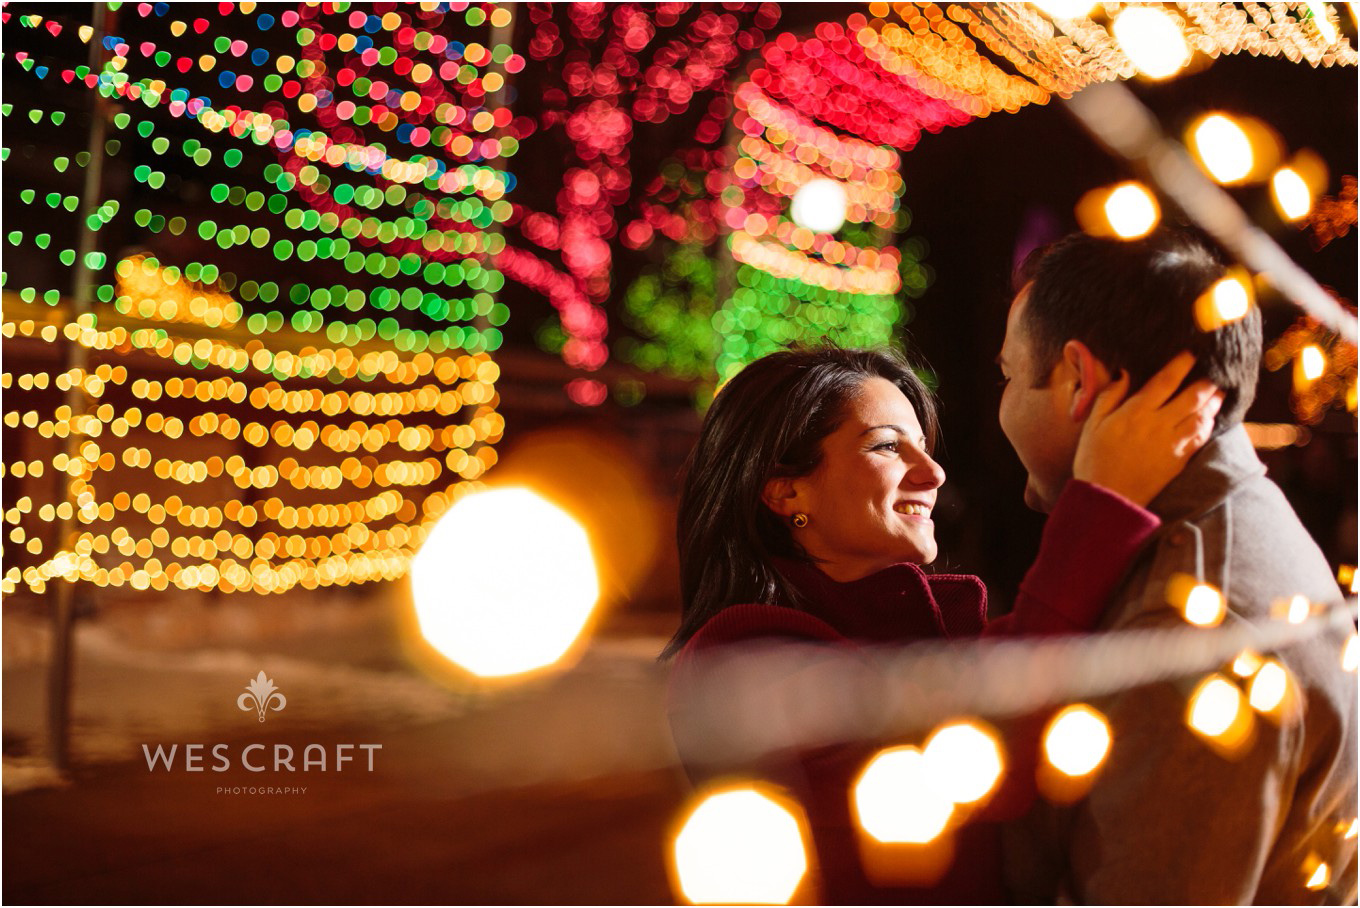 In Chicago Christmas is a cold but beautiful time to have engagement photographs.